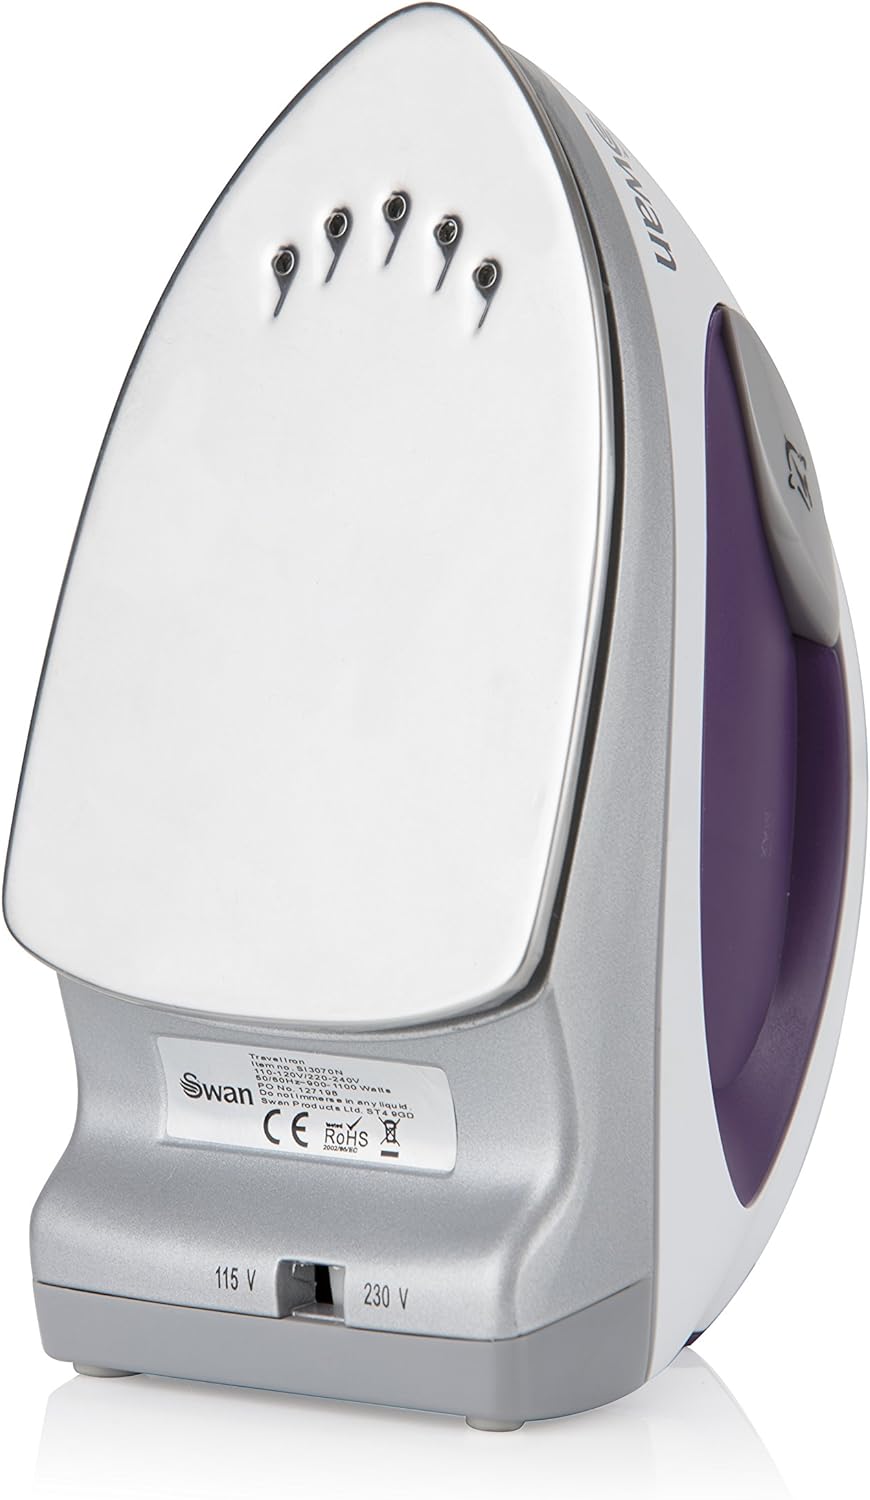 Swan SI3070N Compact Fast Heat up Steam Travel Iron -3734